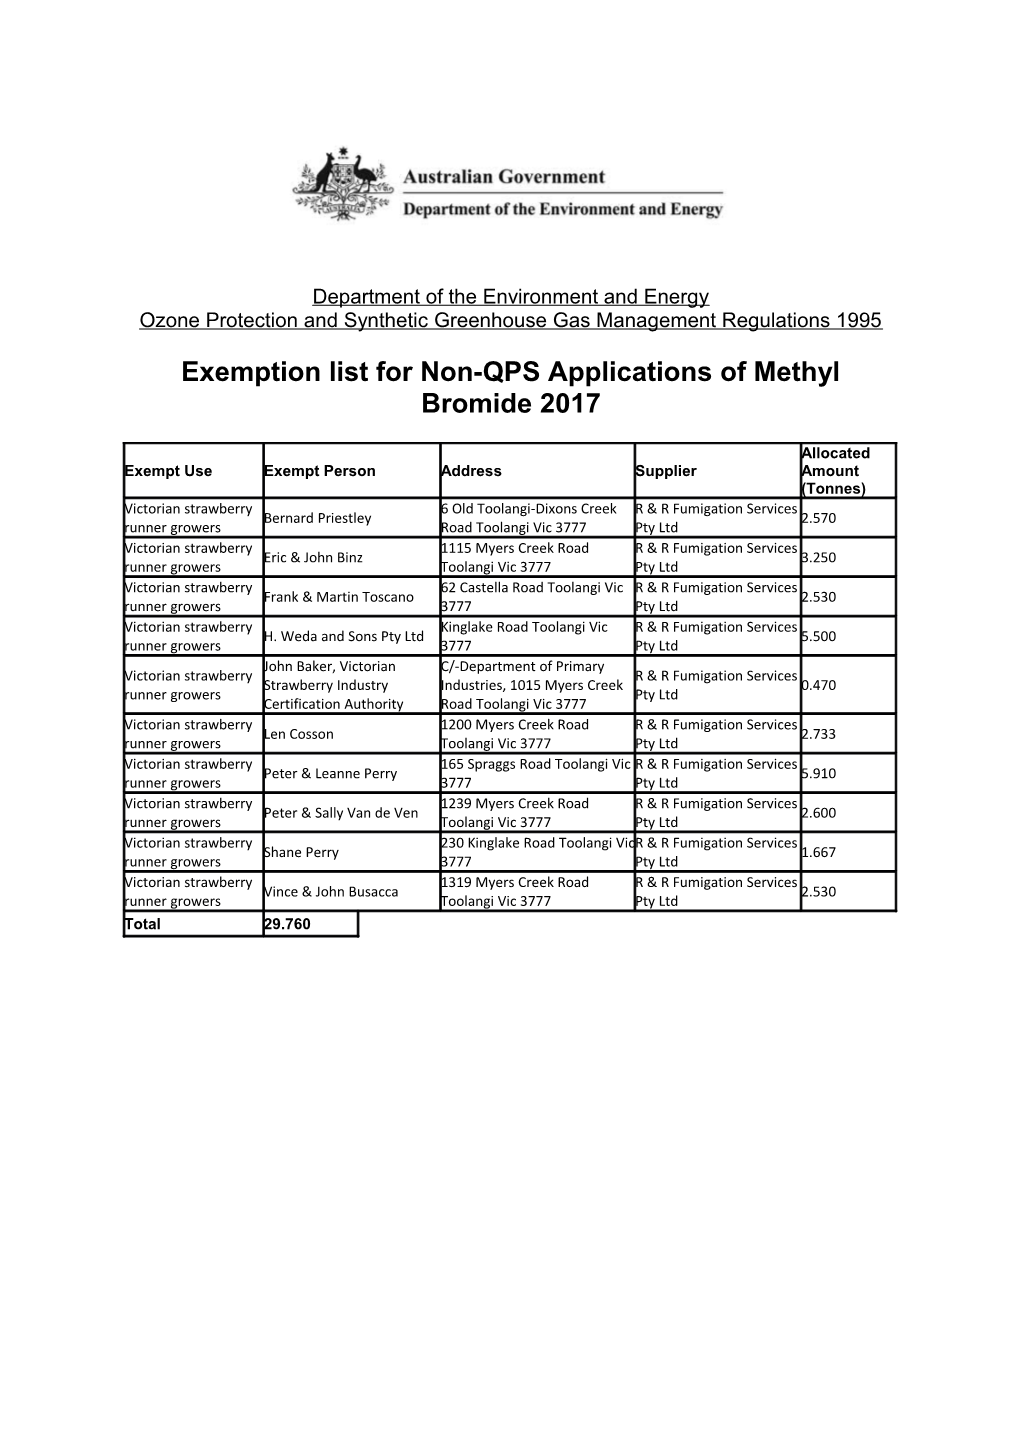 Exemption List for Non-QPS Applications of Methyl Bromide 2017